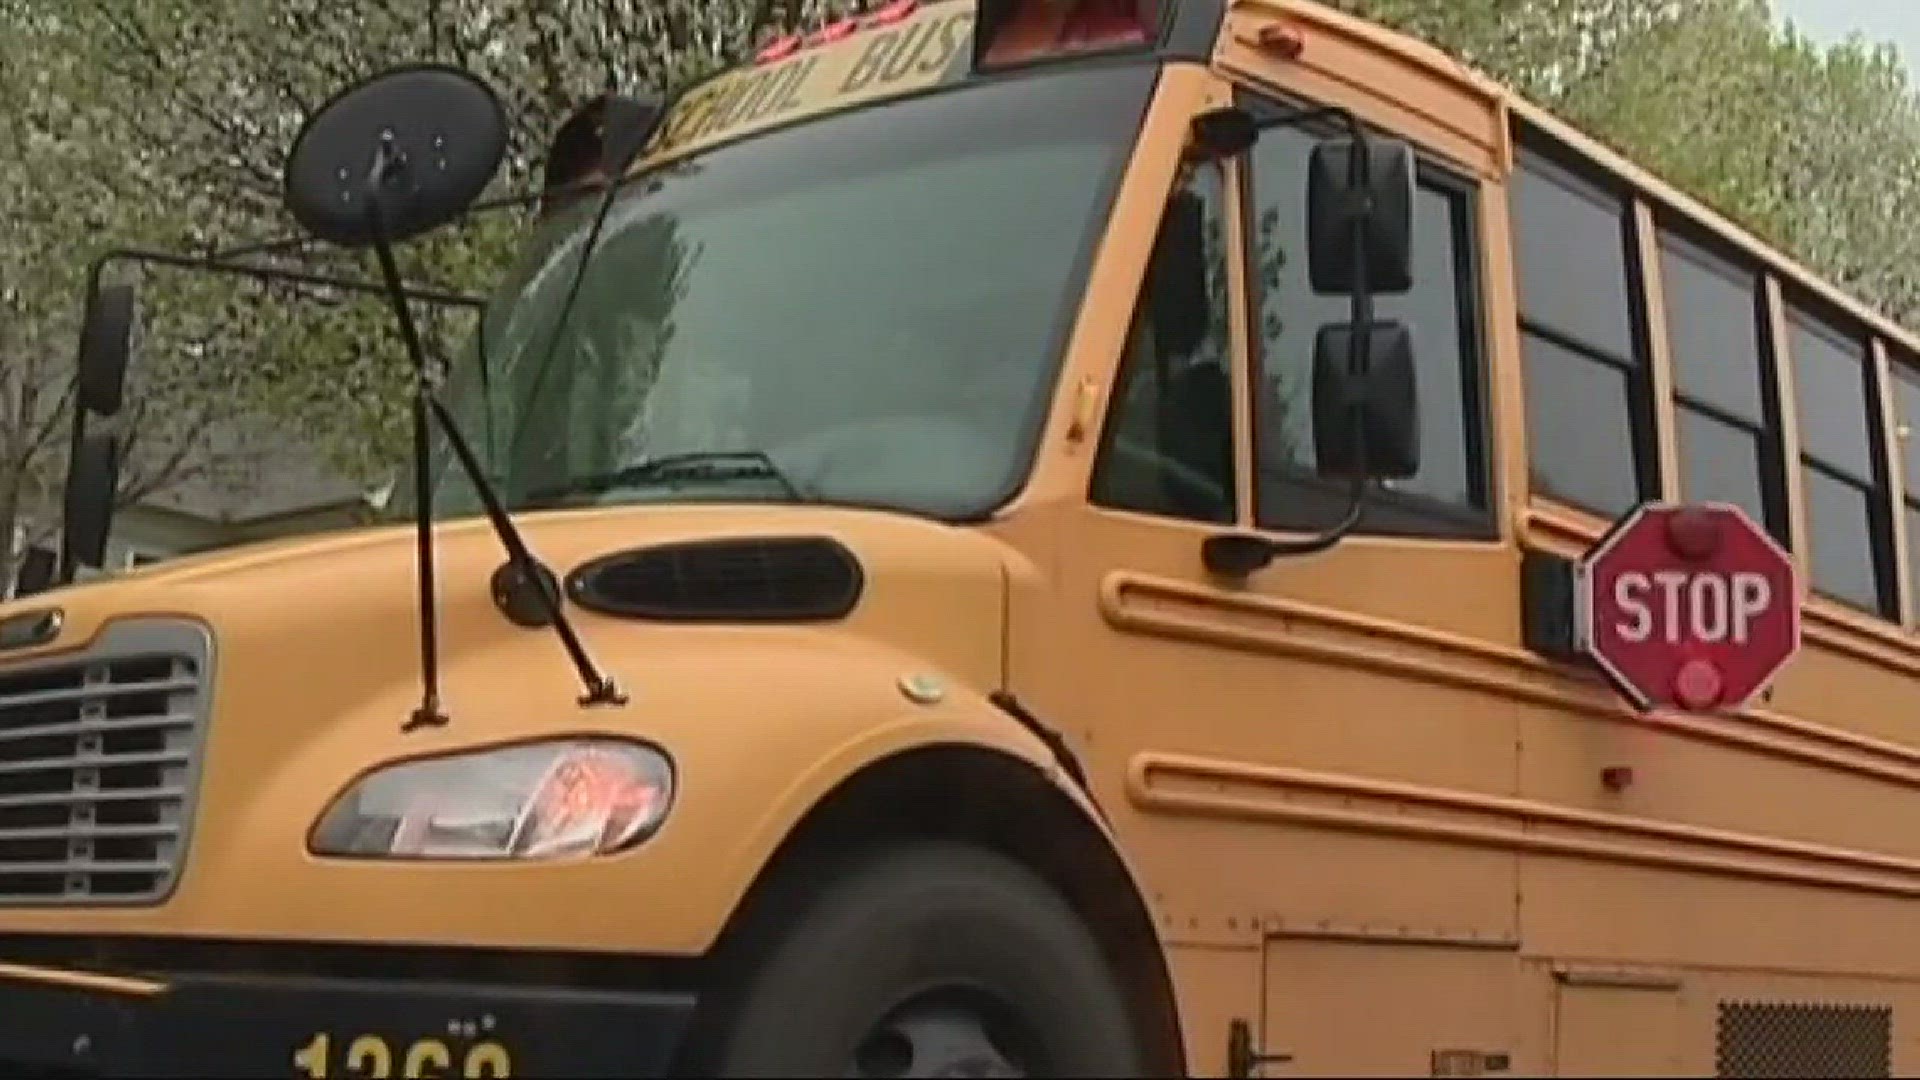 Due to fights inside school buses, new cameras have been installed and a GPS tracking app should help bring down the fights. But is it too far?